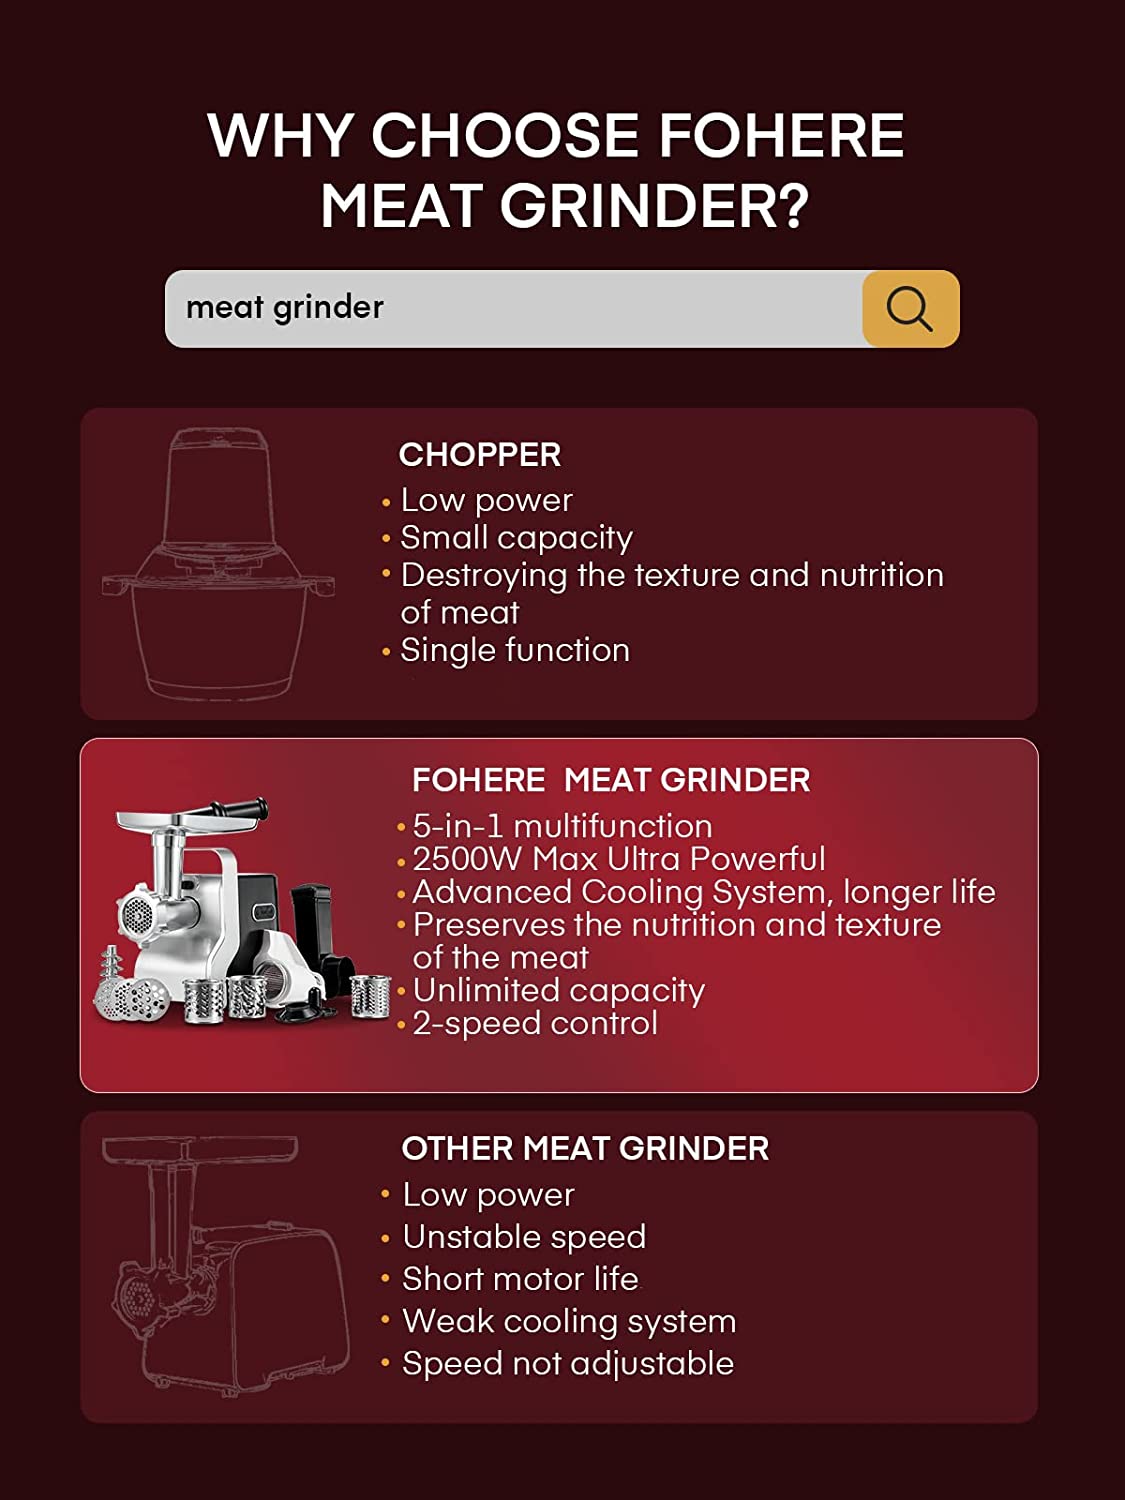 why choose fohere meat grinder? Electric Meat Grinder Heavy Duty - 5 in 1 2500W Max Powerful Home Food Grinder - Sausage Stuffer - Slicer/Shredder/Grater - Kubbe & Tomato Juicing Kits - 3 Stainless Steel Grinding Plates - Size #12